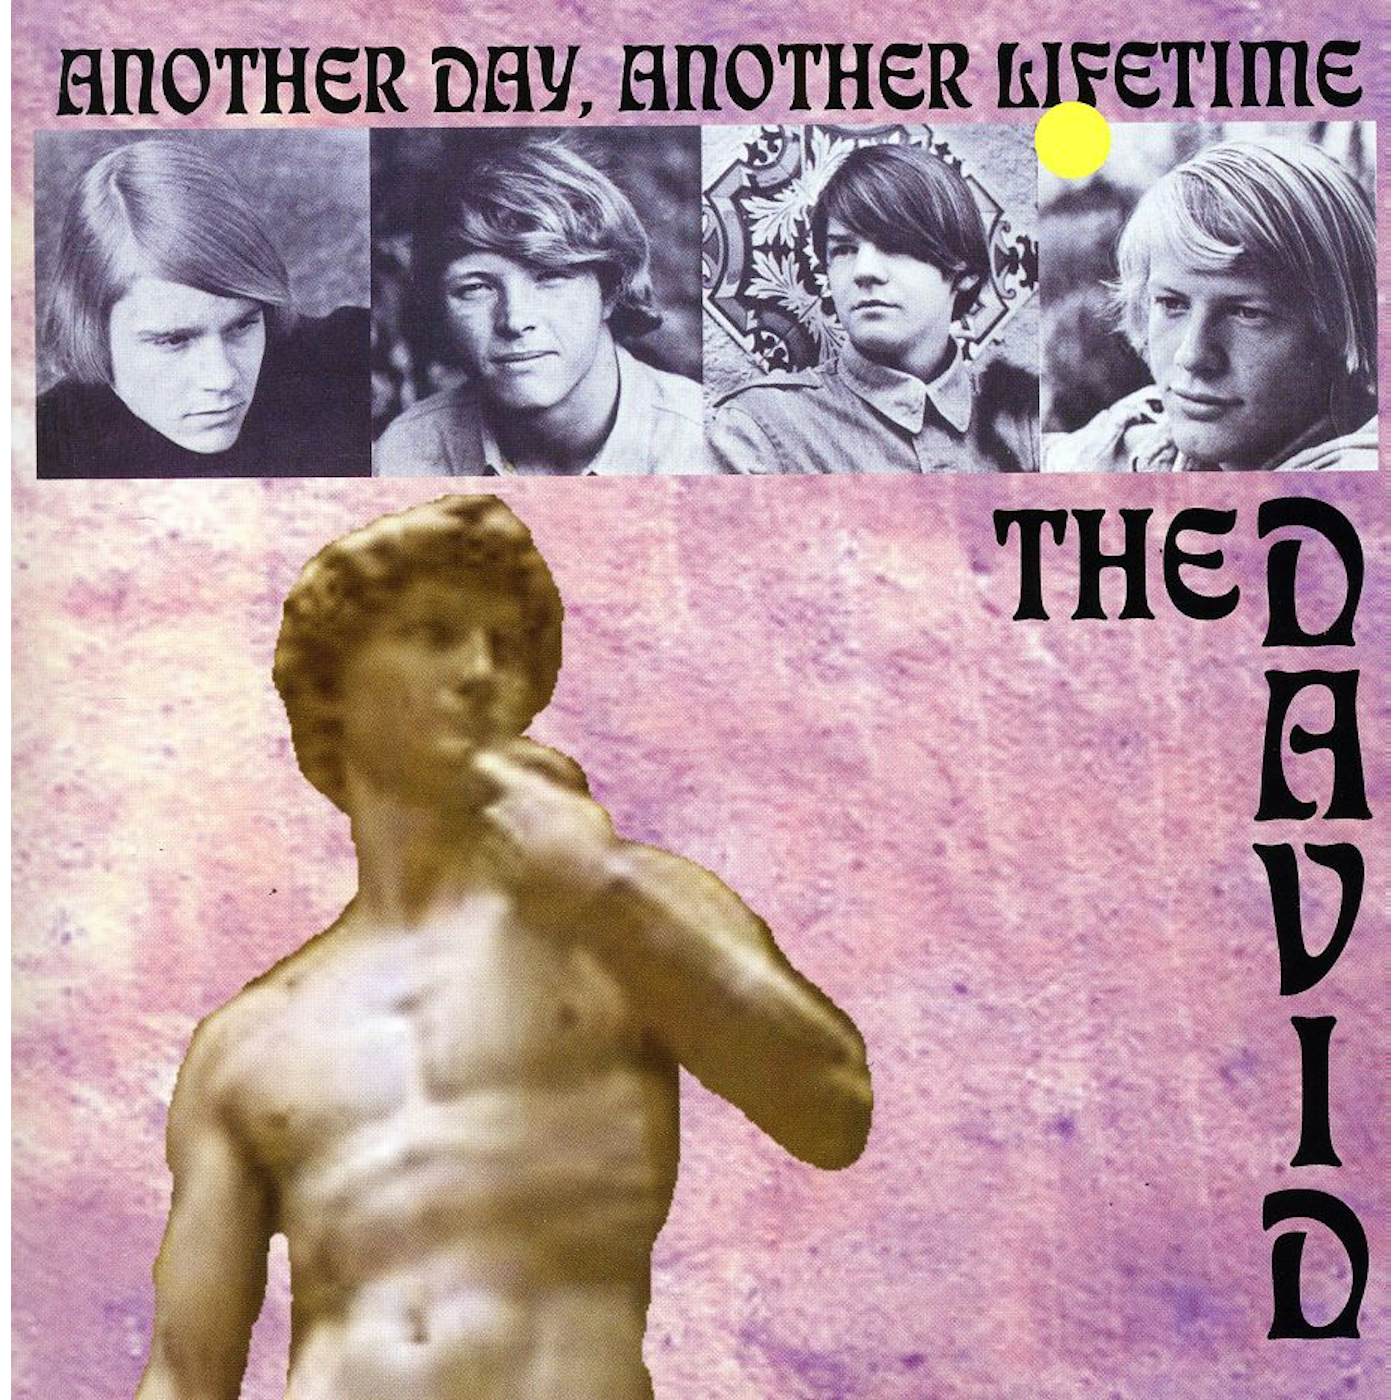 David ANOTHER DAY ANOTHER LIFETIME CD